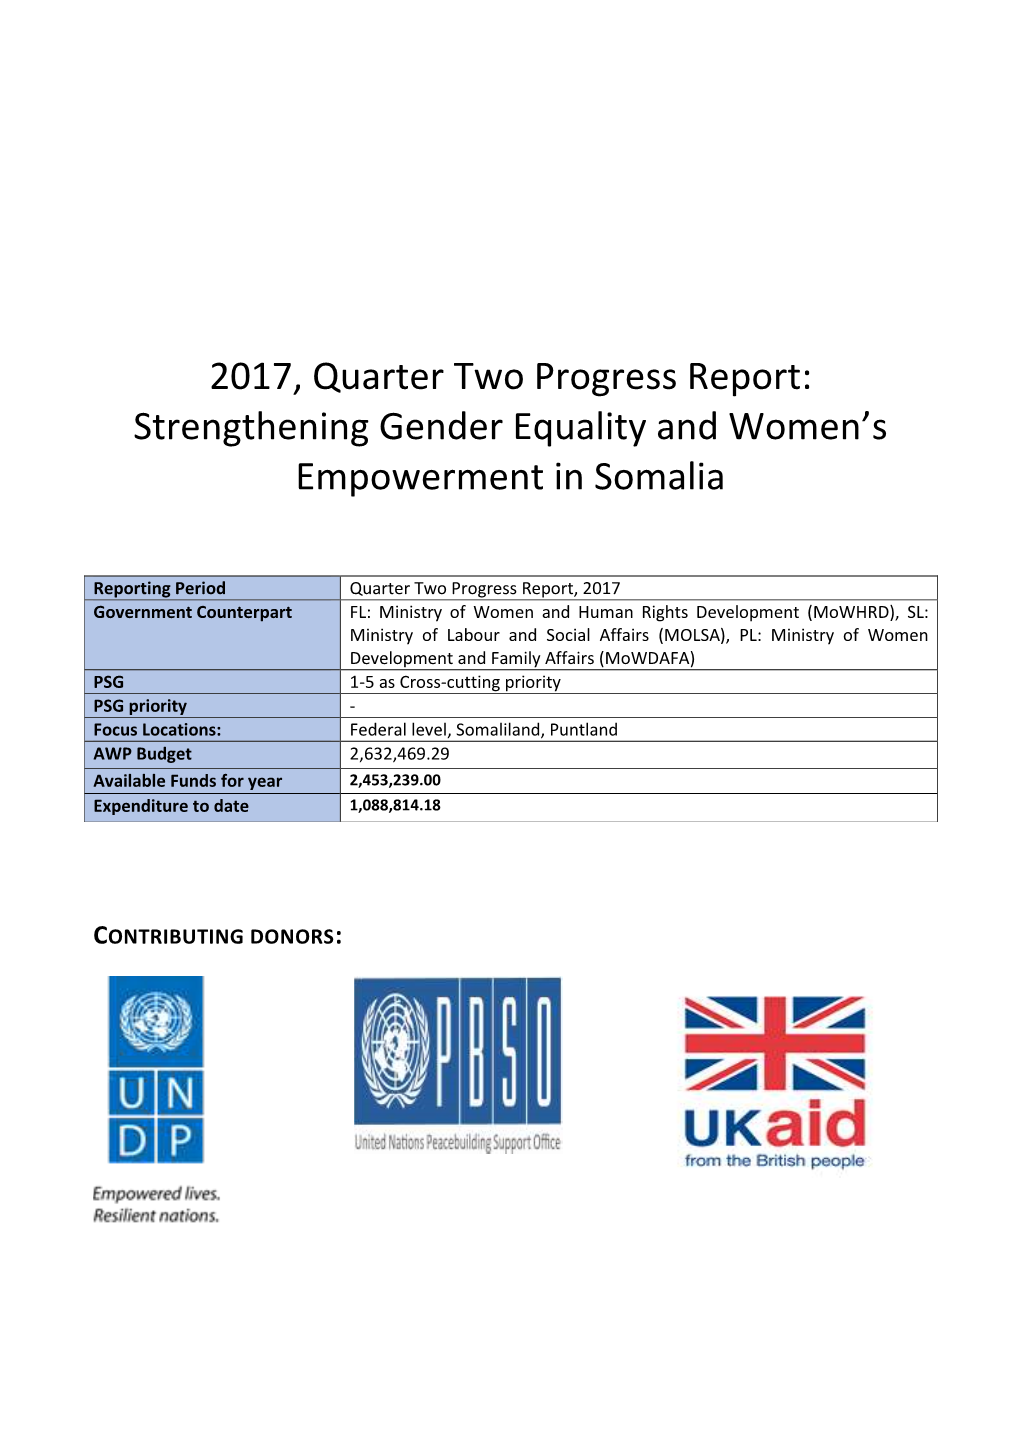 Strengthening Gender Equality and Women's